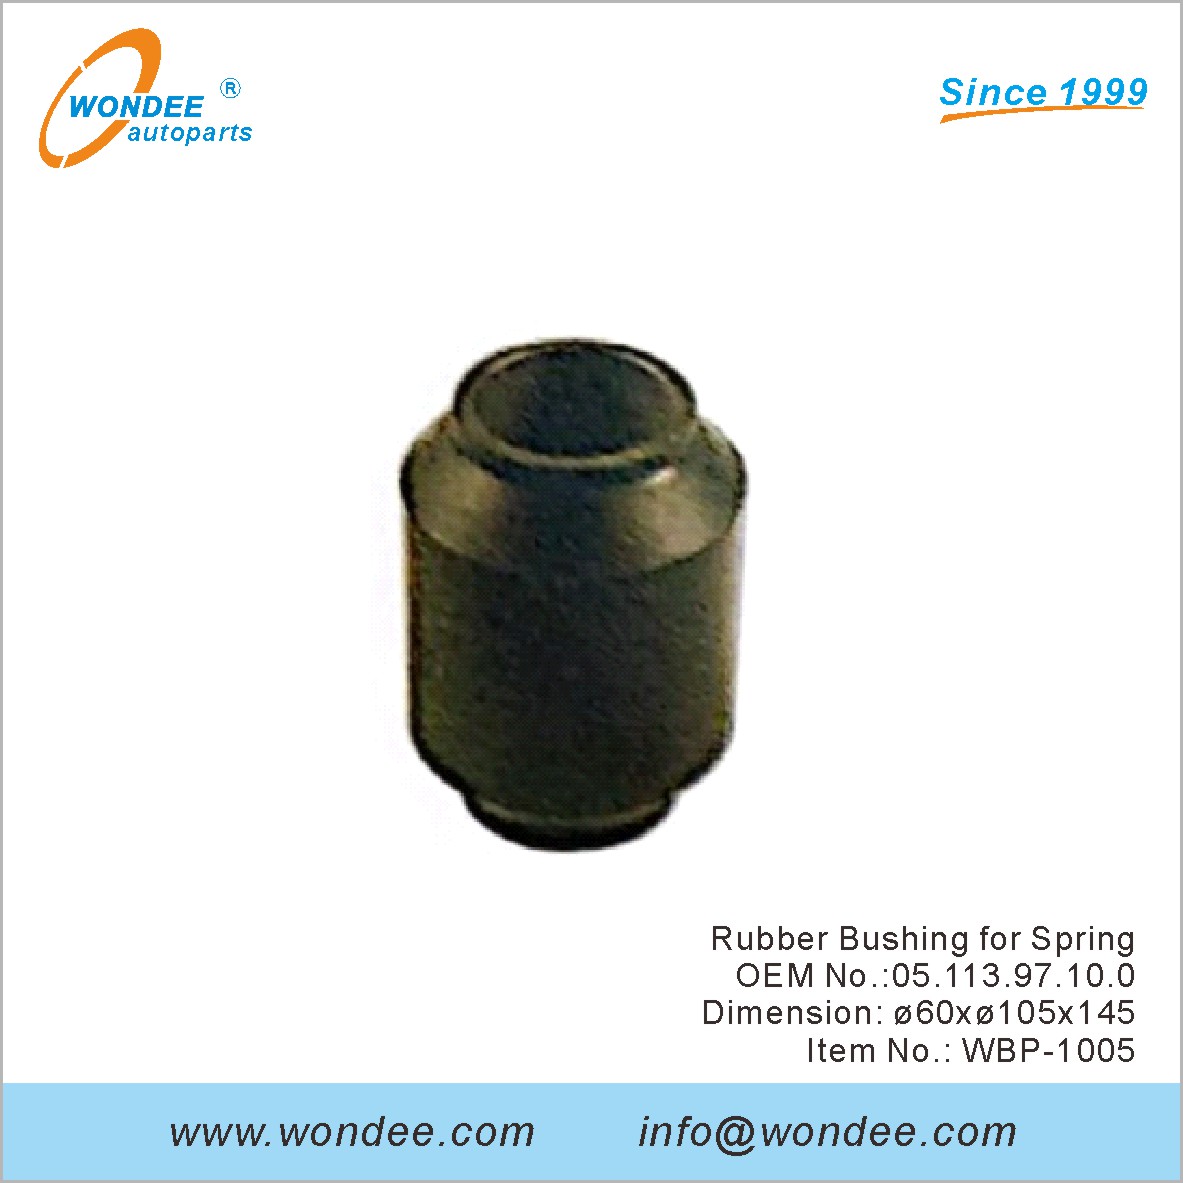 Rubber Bushing for Spring OEM 0511397100 for BPW from WONDEE